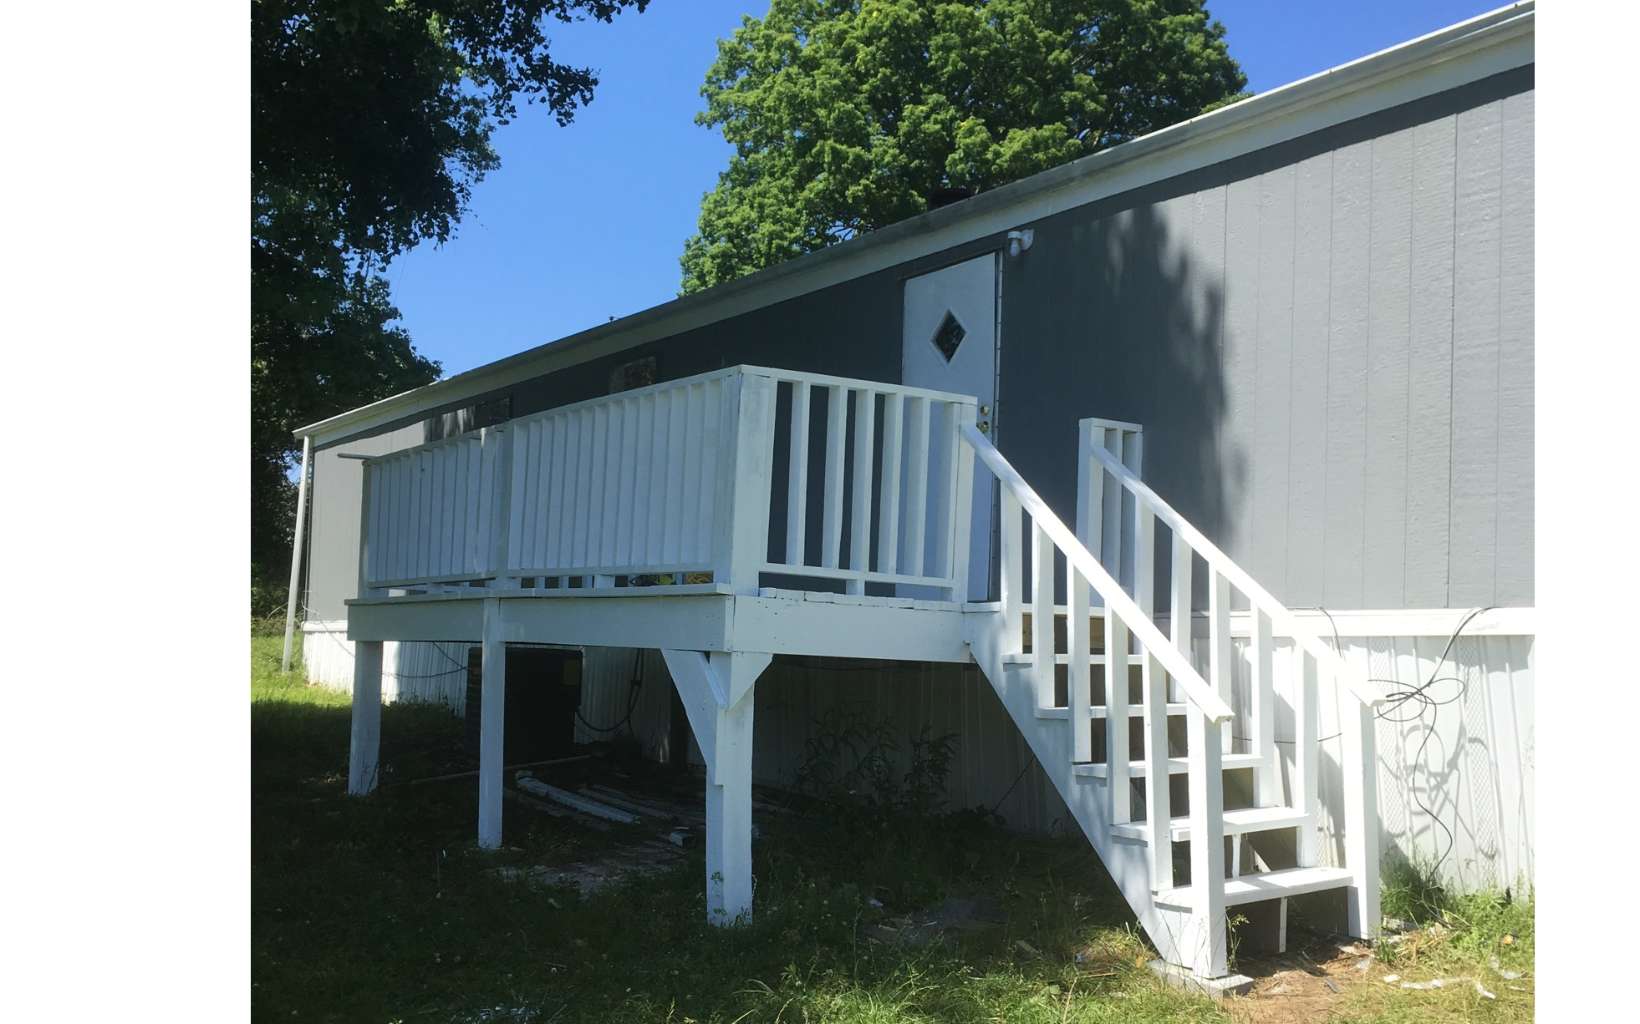 Income generating opportunity in the heart of Fannin County. This property has 4 units , 2 Double Wide and 2 Single Wide Manufactured,fully occupied with a long waiting list. Units have been updated and remodeled within the past 3 years . Current gross income is $39,600 . Landlord pays $1200 annual lawn care and $1200 annual garbage pickup - all other costs are tenant expenses. This is a rare opportunity to have a positive return on investment immediately after closing. Property has easy access from both Madola Rd as well as Wash Wilson Rd. Located in a peaceful residential neighborhood convenient to both Blue Ridge and McCaysville. Each unit has public water. Appointment required to view the interior. Call listing agent Rental 1 - $925 Rental 2 - $700 Rental 3- $925 Rental 4- $750